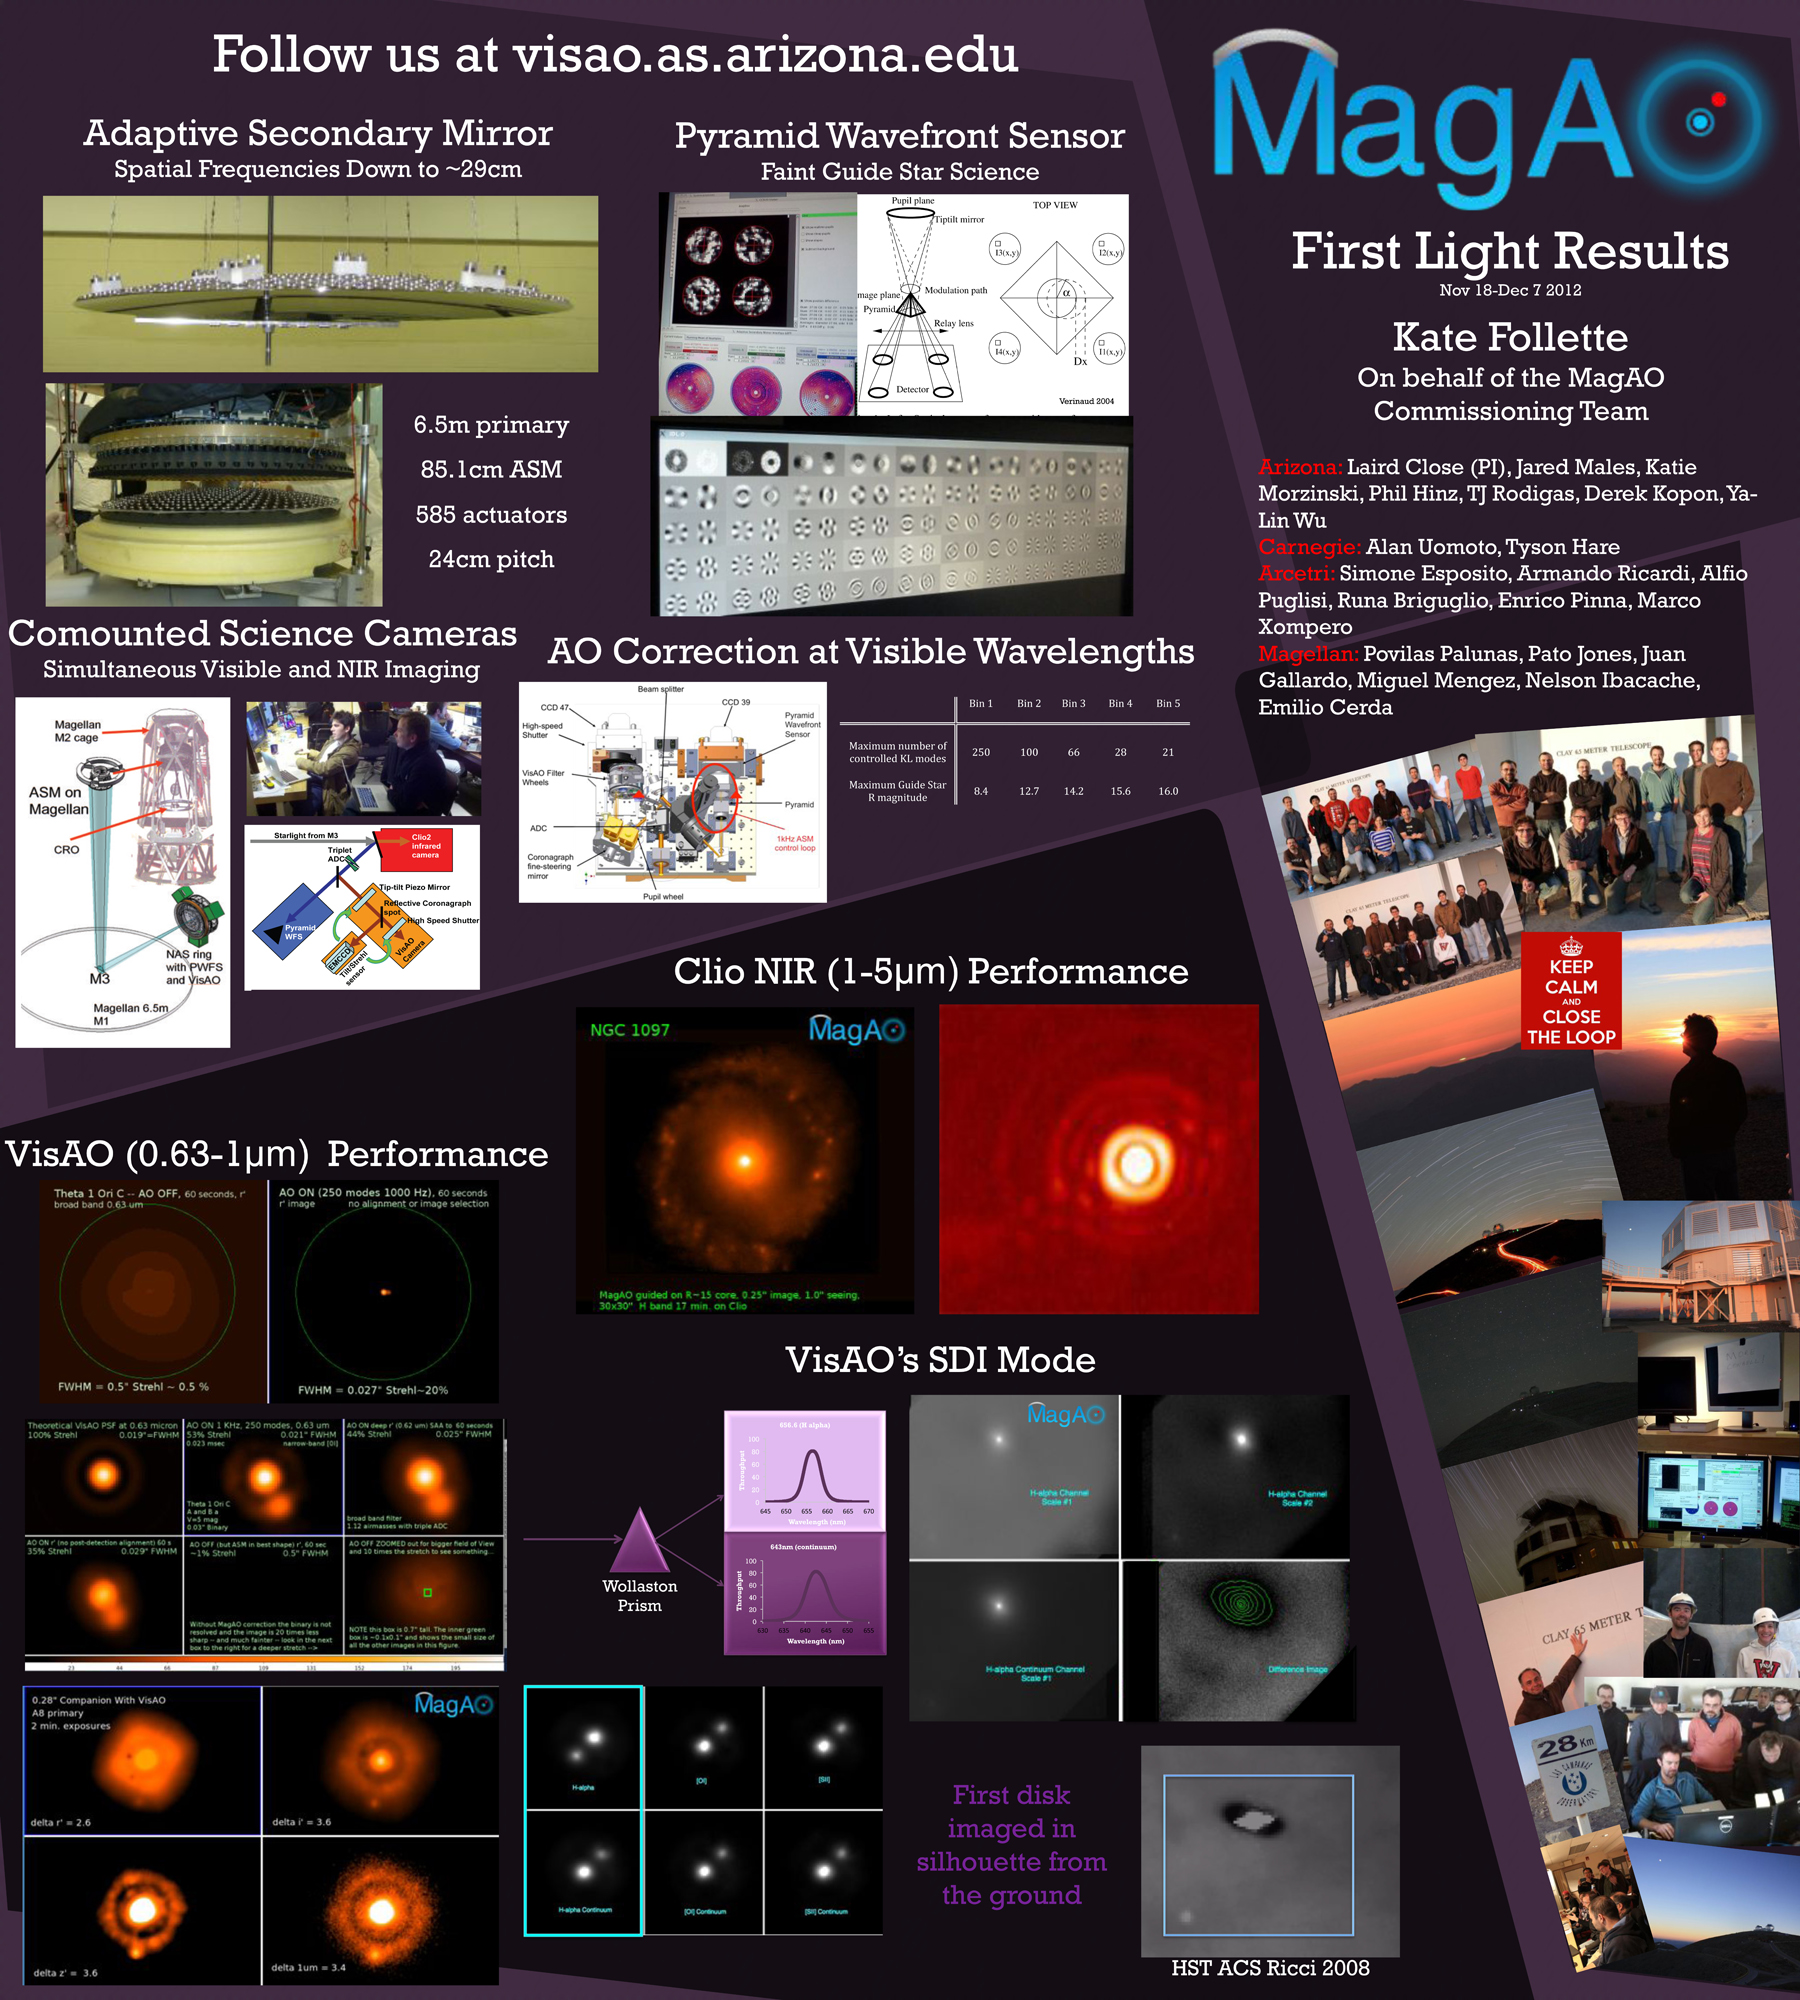 MagAO AAS Poster by Kate Follette